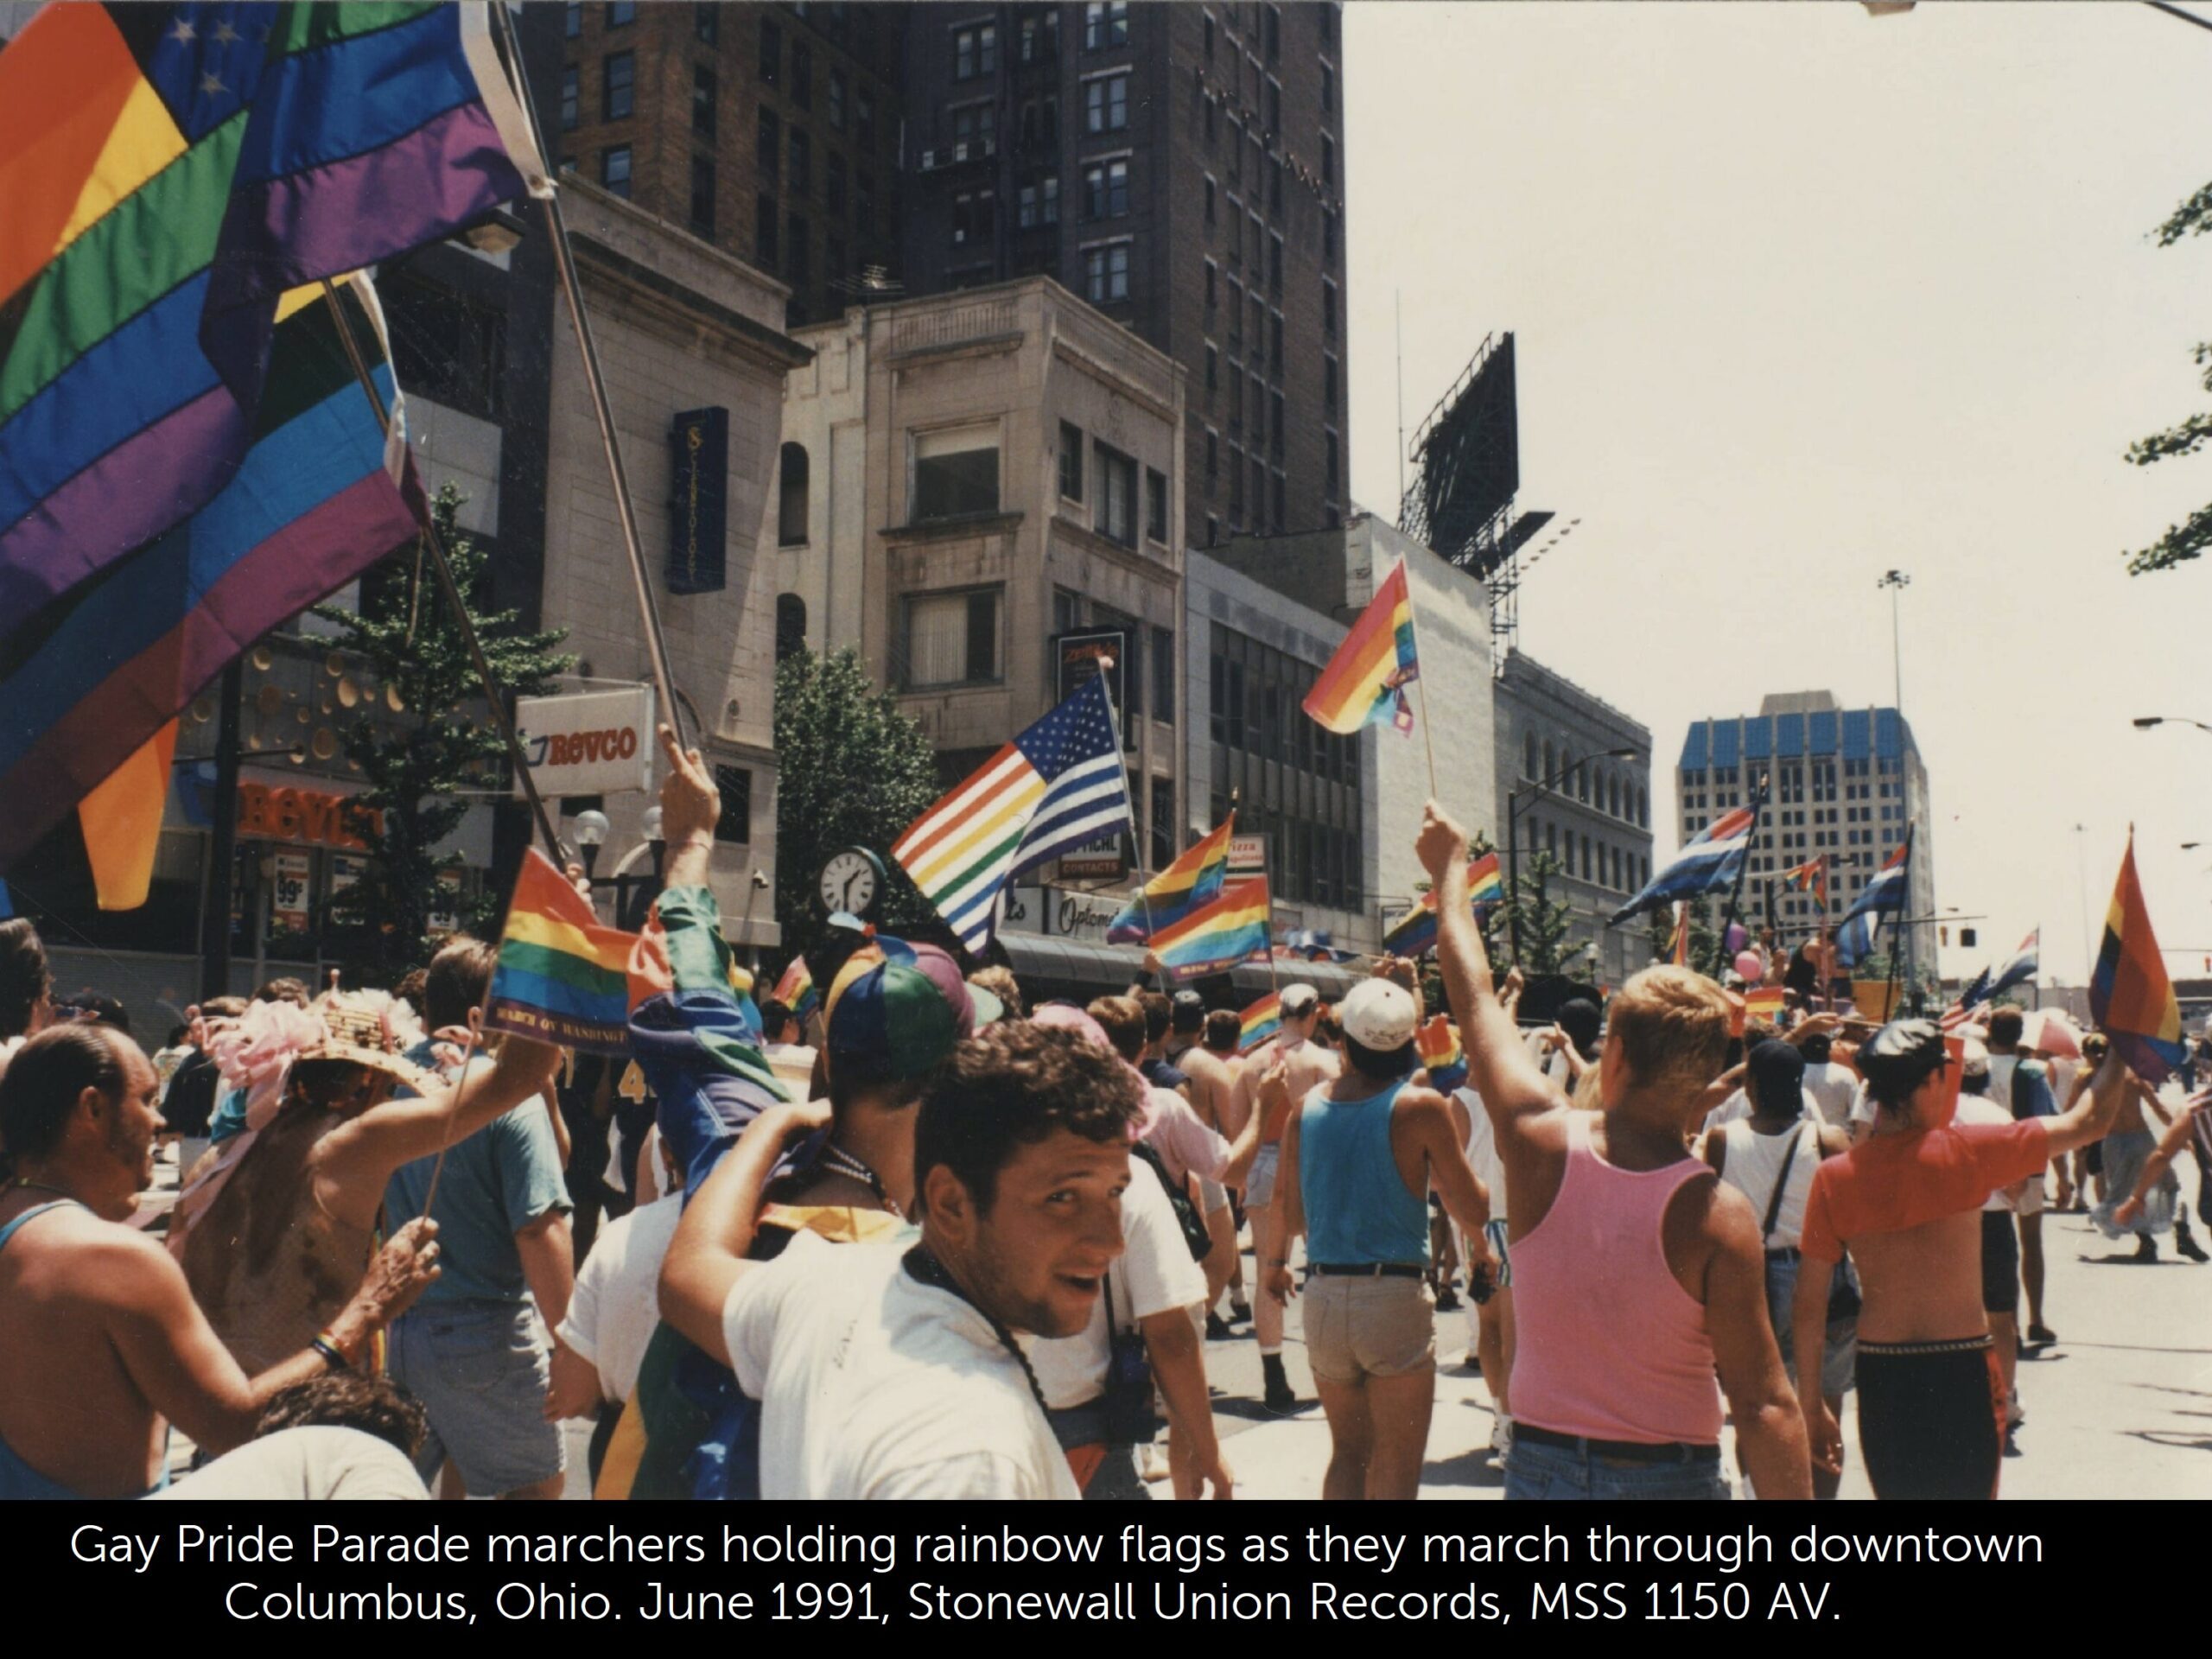 A photo of gay pride marchers holding rainbow flags as they march through downtown Columbus